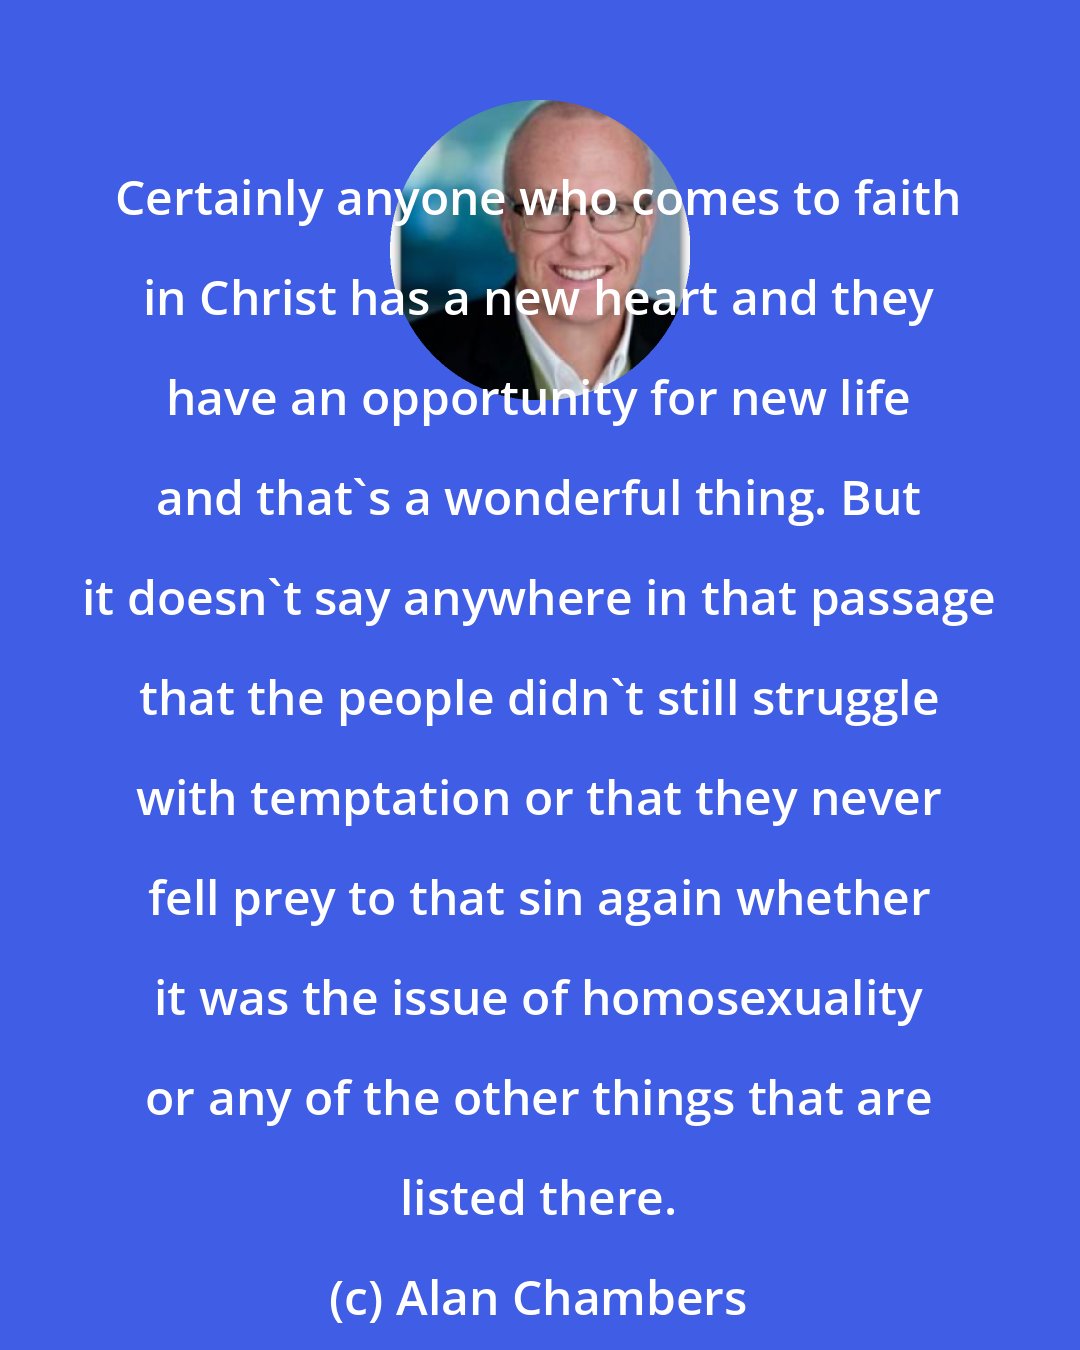 Alan Chambers: Certainly anyone who comes to faith in Christ has a new heart and they have an opportunity for new life and that's a wonderful thing. But it doesn't say anywhere in that passage that the people didn't still struggle with temptation or that they never fell prey to that sin again whether it was the issue of homosexuality or any of the other things that are listed there.